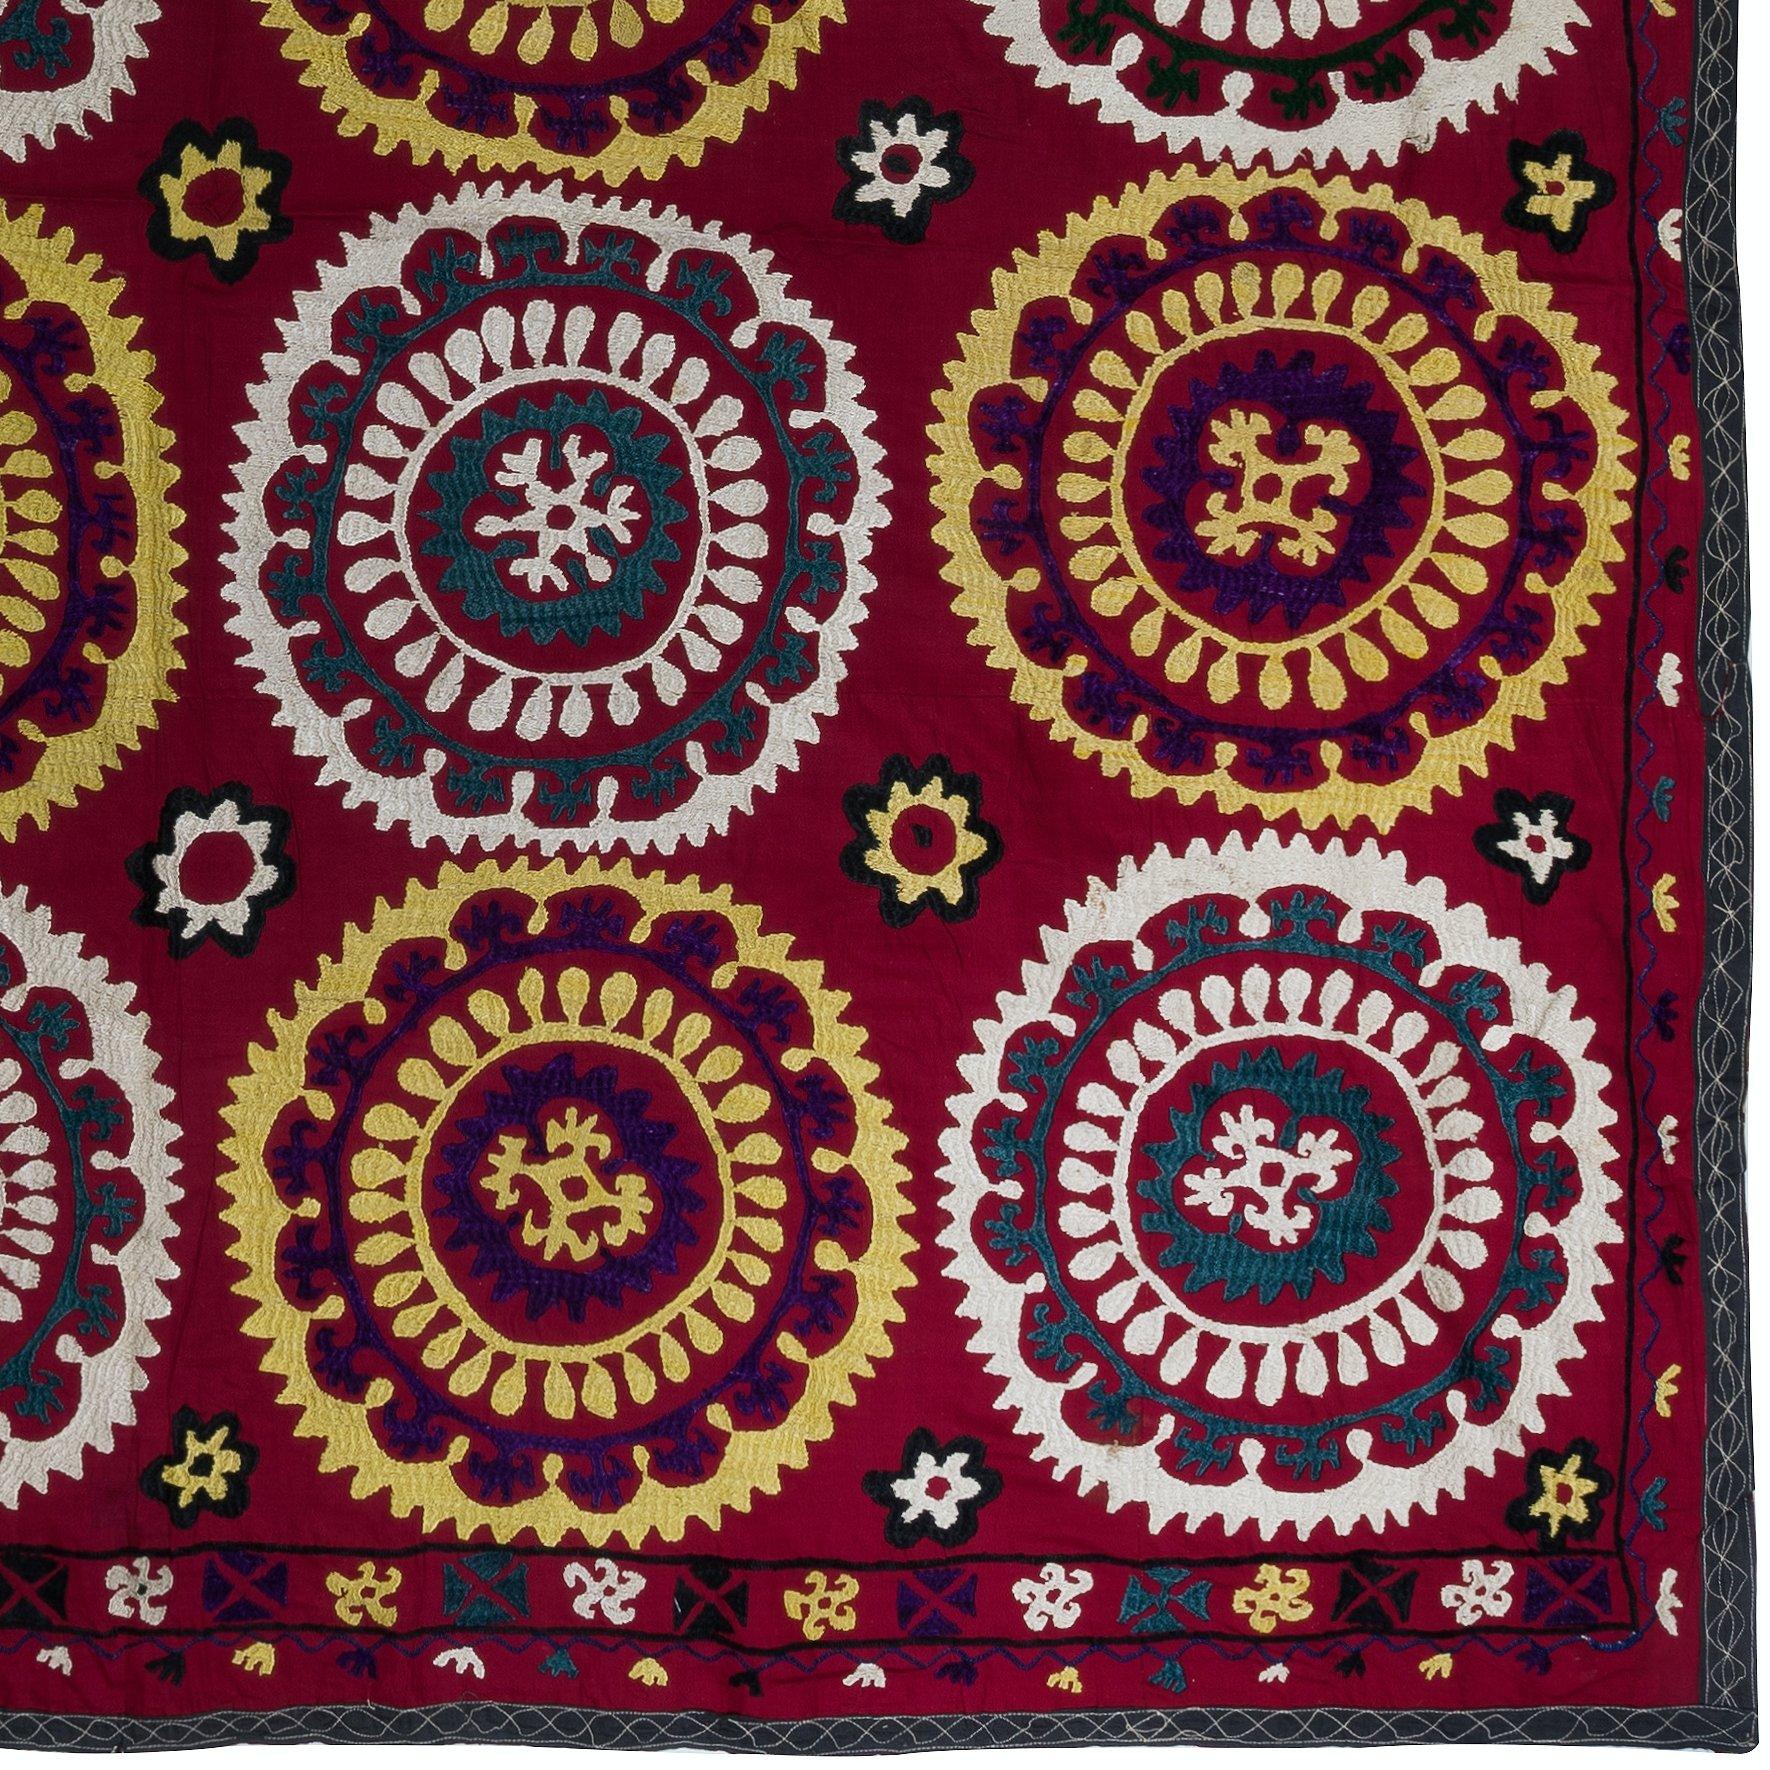 Embroidered 6.5x6.8 ft Silk Embroidery Suzani Wall Hanging, Uzbek Bedspread, Red Tablecloth For Sale